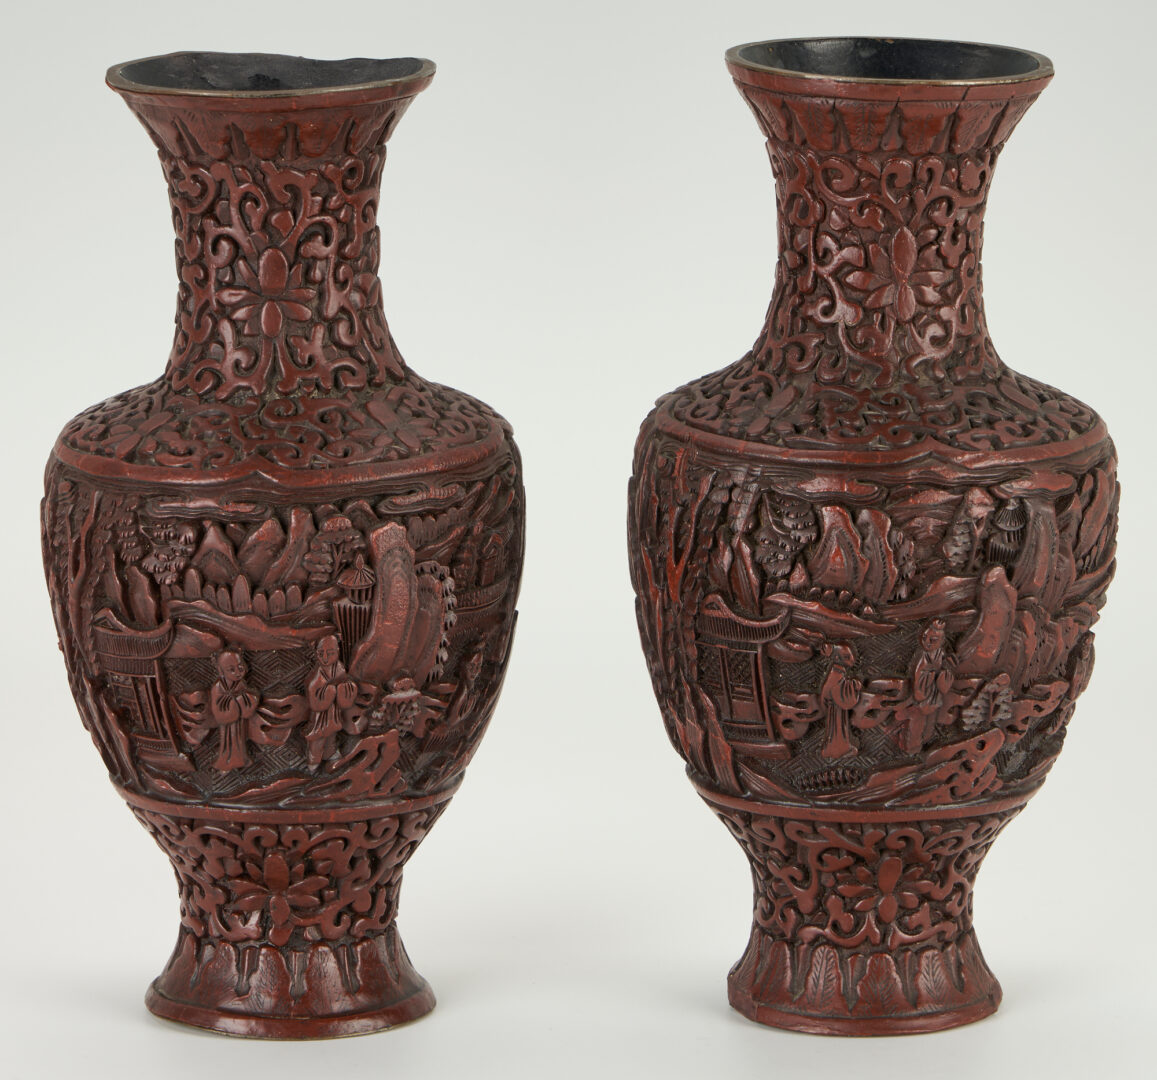 Lot 27: 2 Carved Chinese Buddhist Figures plus Pr. Cinnabar Tixi Lacquer Vases